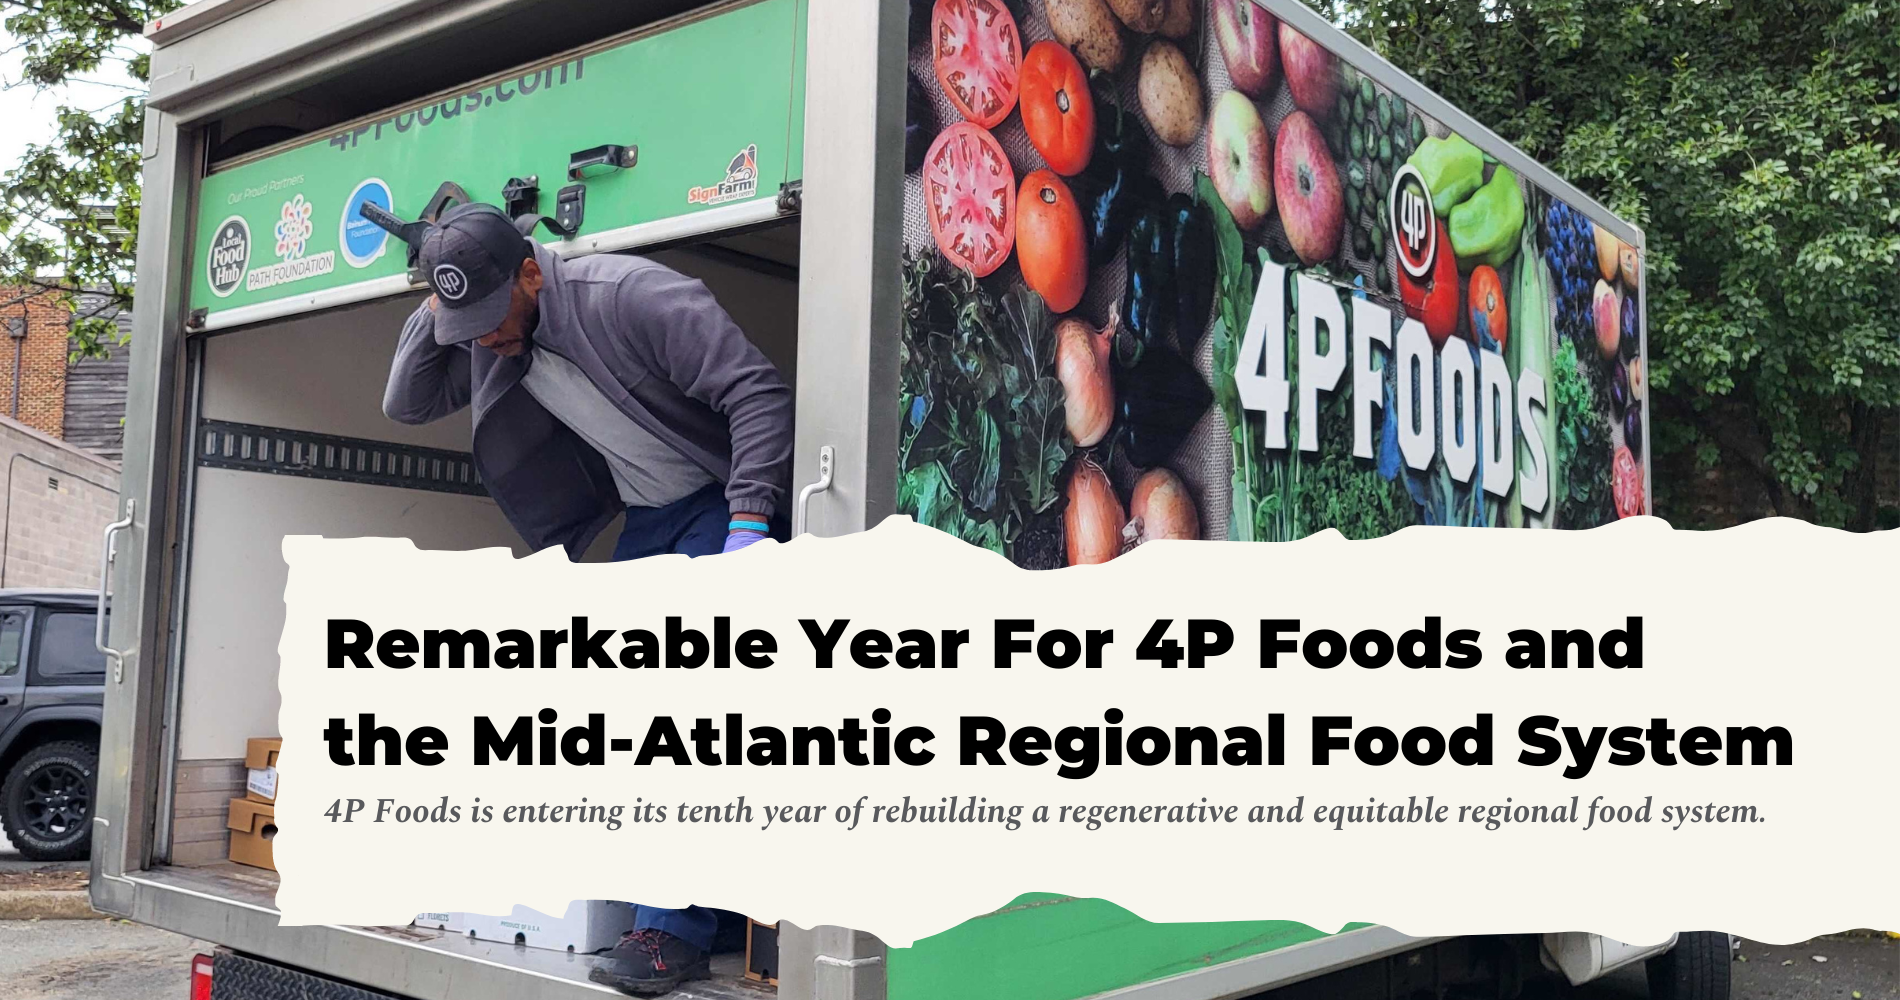 Remarkable Year For 4P Foods and the Mid-Atlantic Regional Food System image